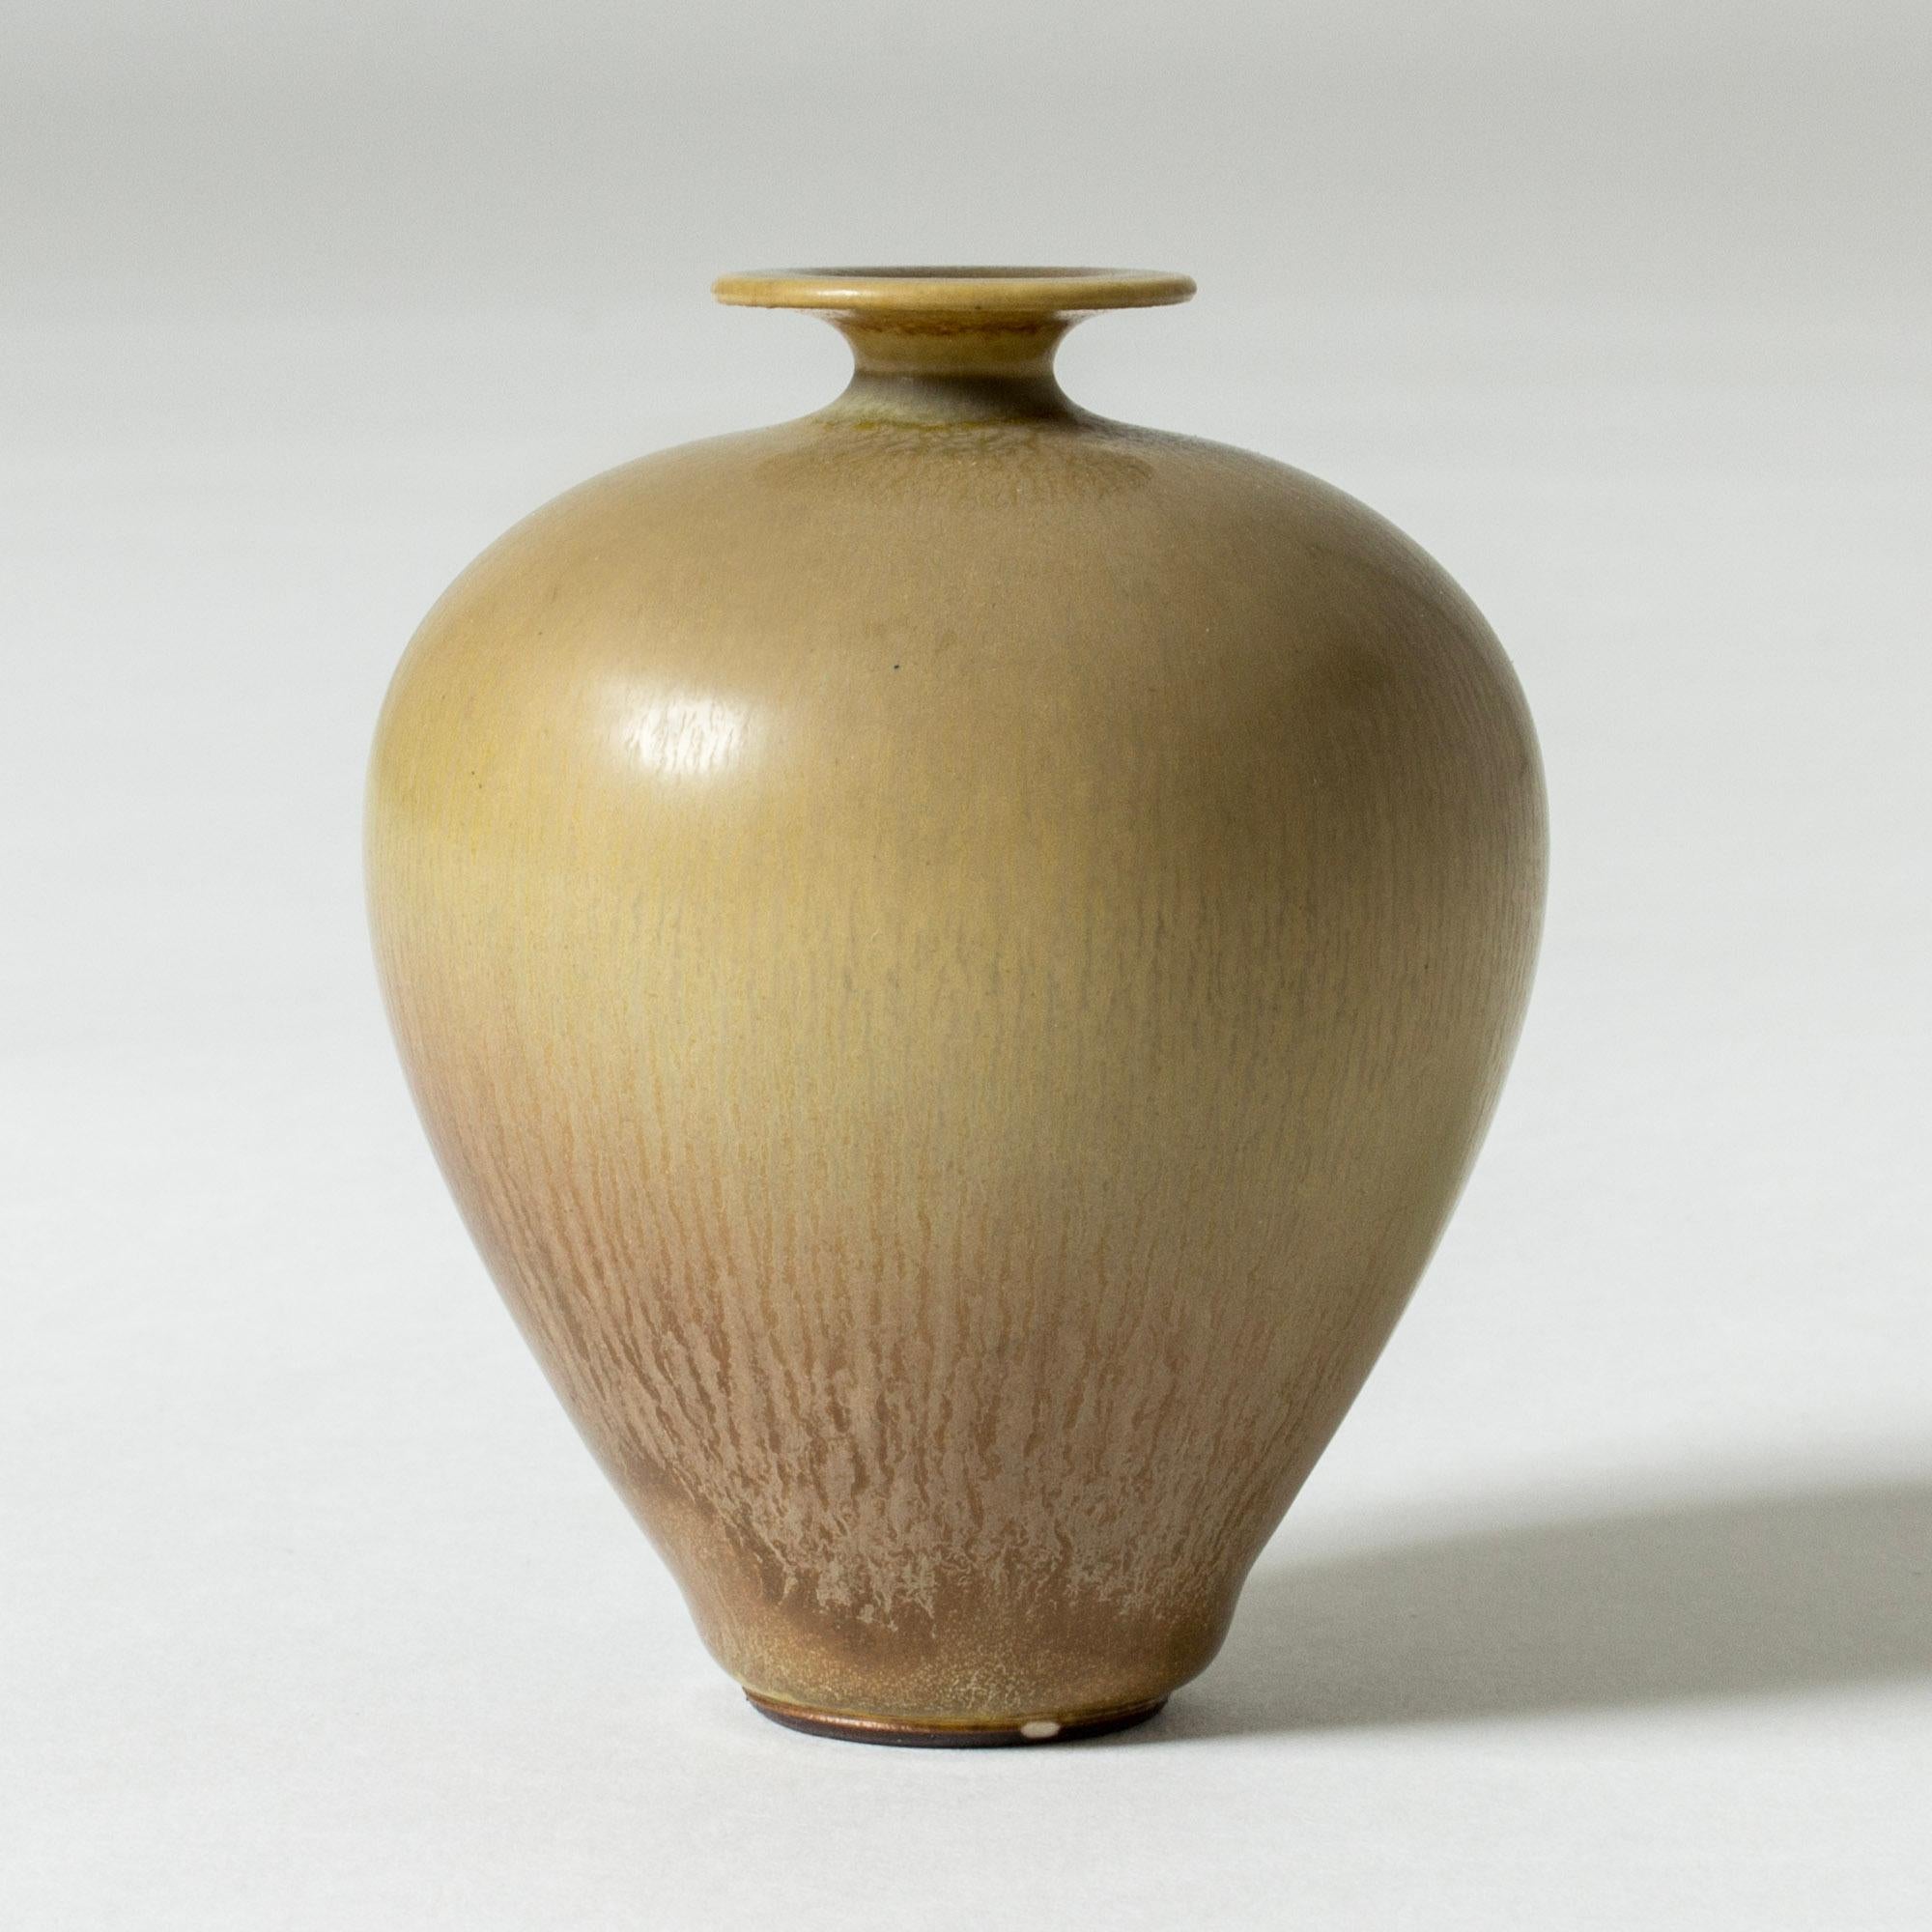 Miniature stoneware vase by Berndt Friberg, in an elegant form. Beige and brown hare’s fur glaze.

Berndt Friberg was a Swedish ceramicist, renowned for his stoneware vases and vessels for Gustavsberg. His pure, composed designs with satiny,